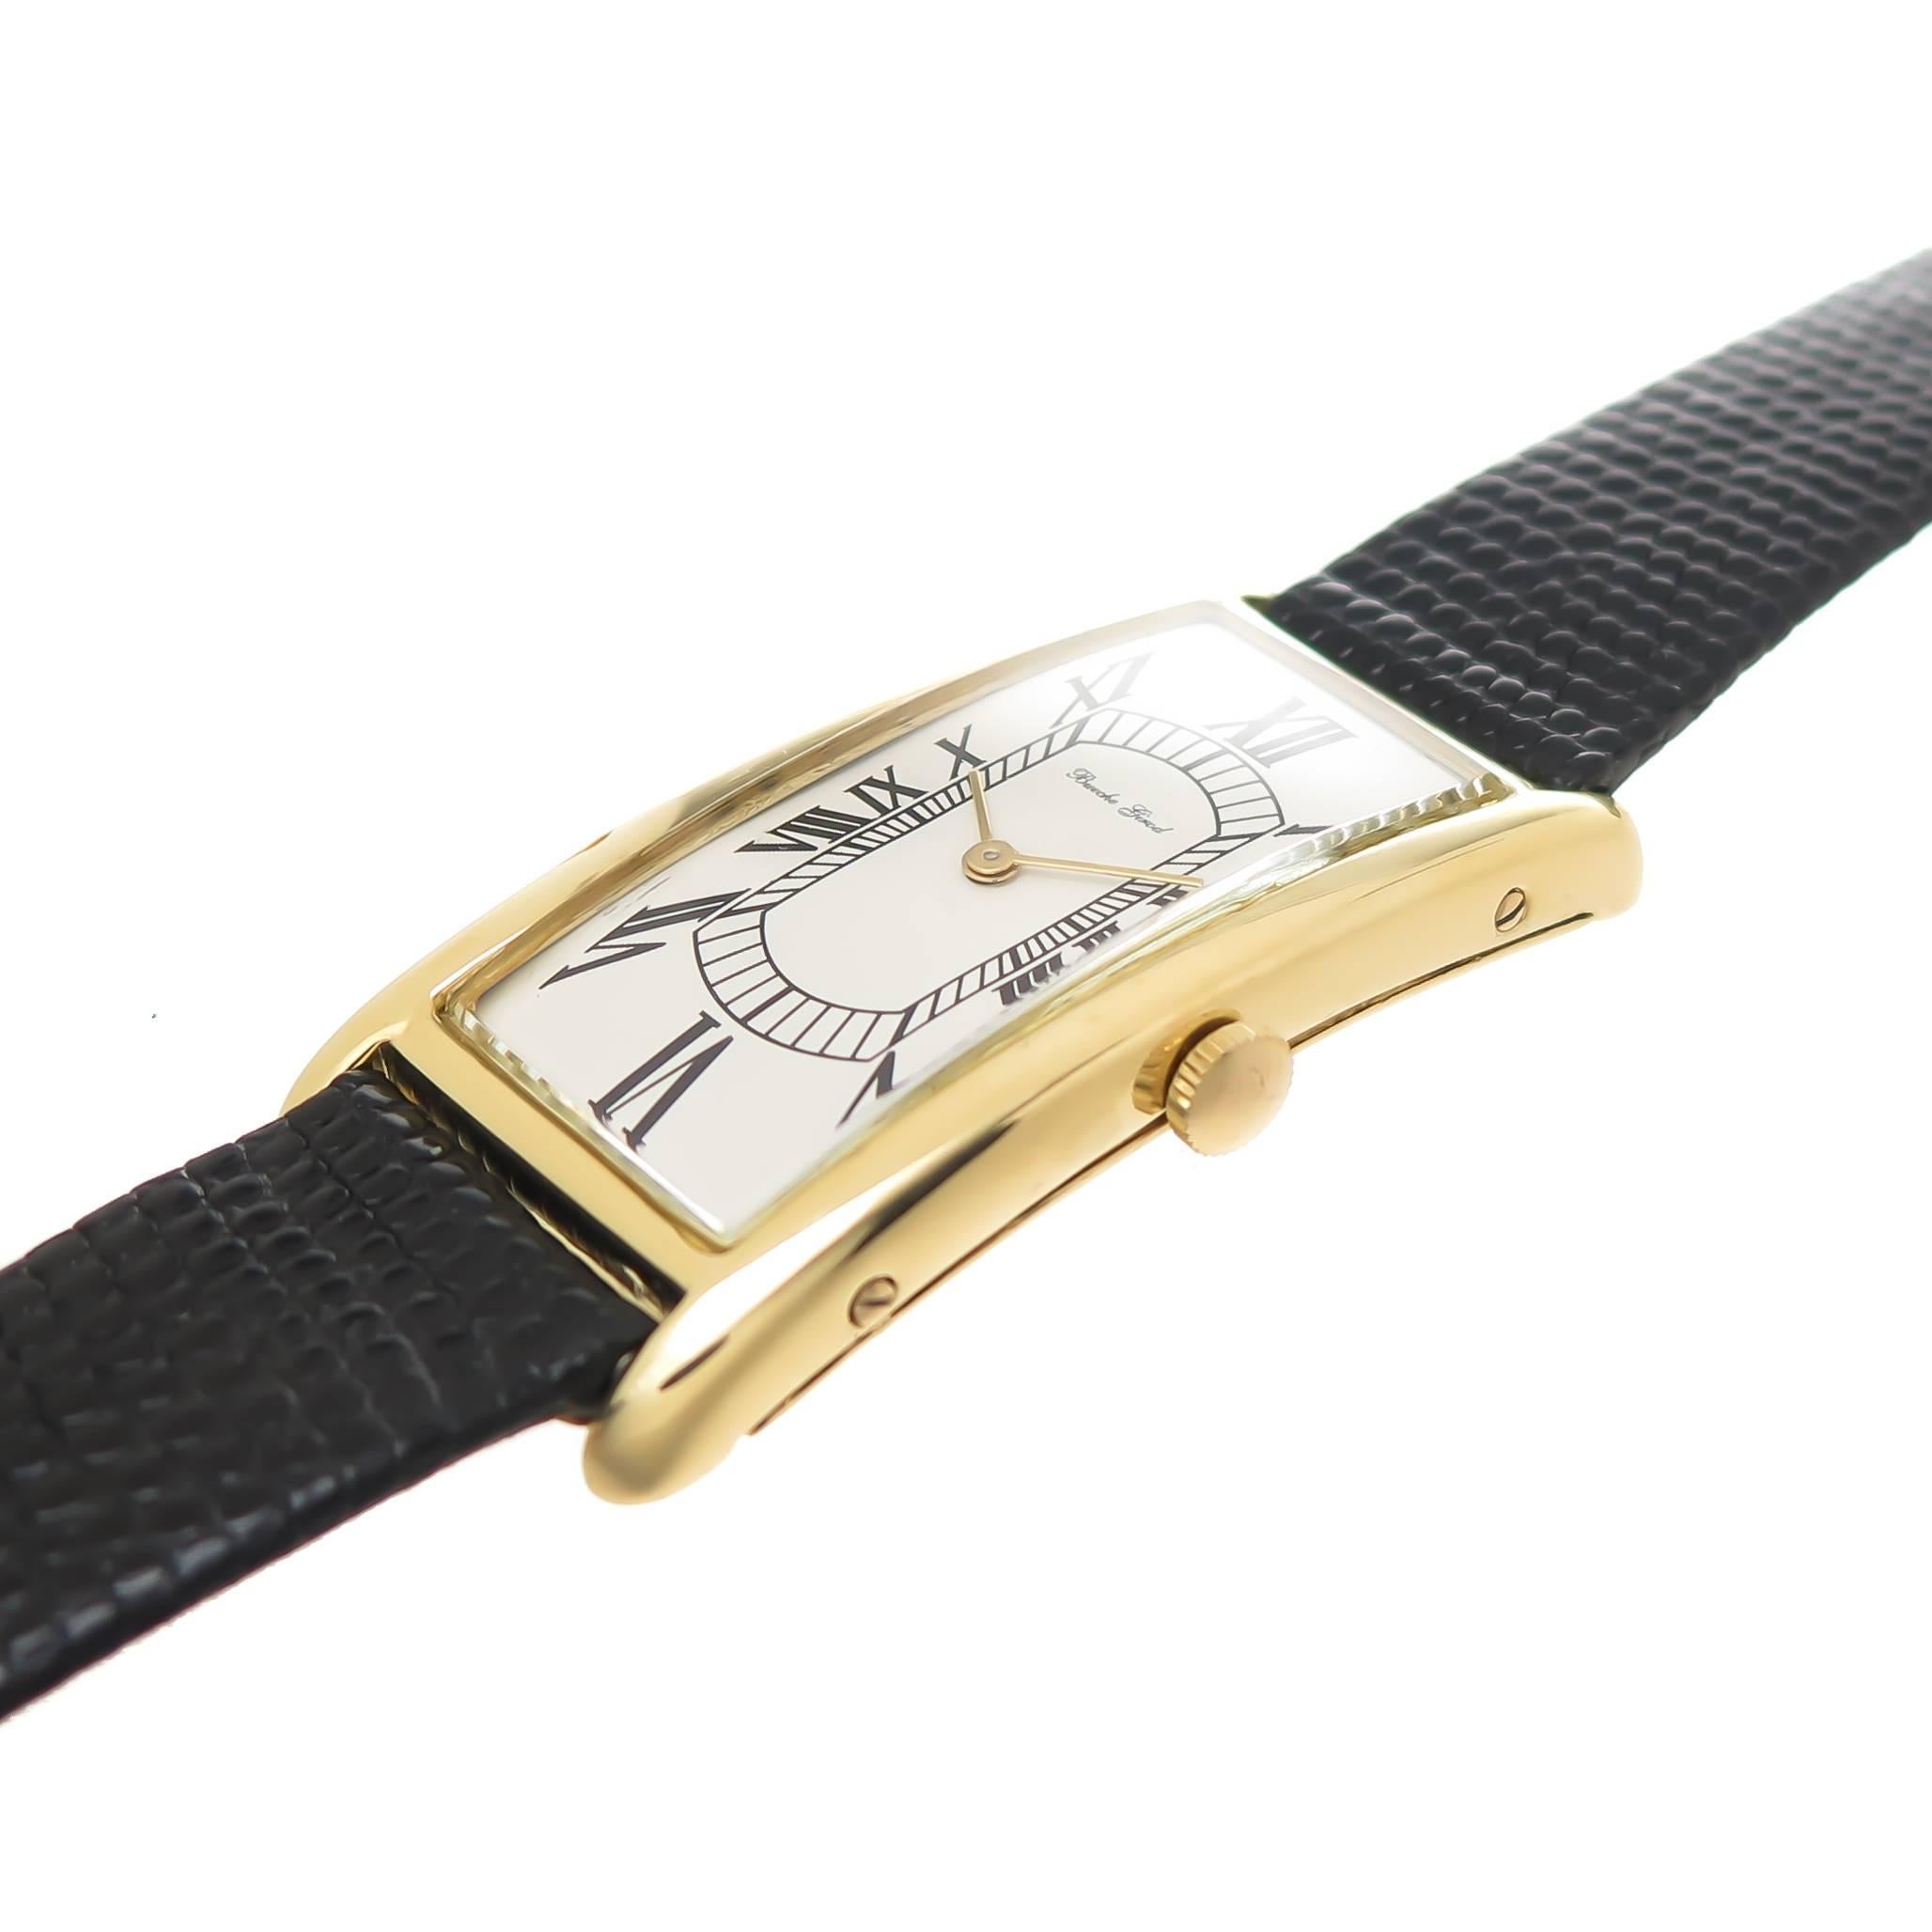 Circa 1970 Bueche Girod 18K yellow Gold Wrist Watch, measuring a dramatic 2 inches in Length ( 49 MM ) and 7/8 inch wide with a significant wrist fitting curve. 17 jewel mechanical, manual wind Movement, White dial with Black roman numerals. New